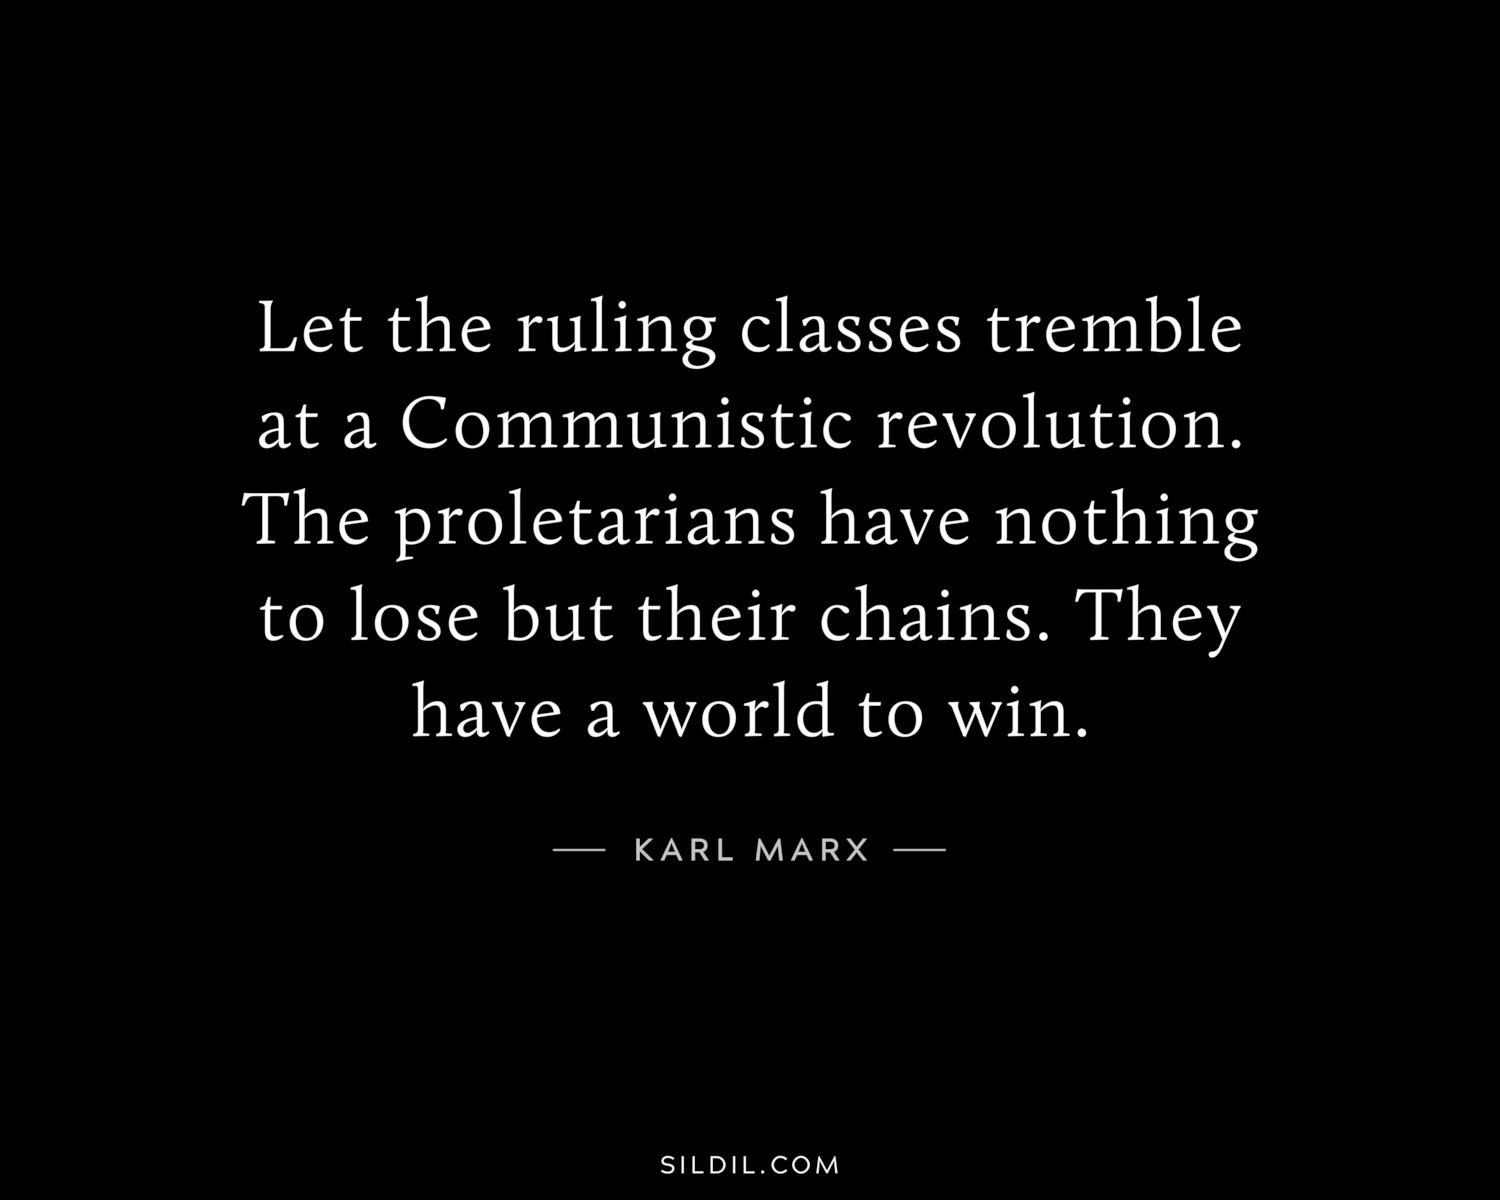 Let the ruling classes tremble at a Communistic revolution. The proletarians have nothing to lose but their chains. They have a world to win.